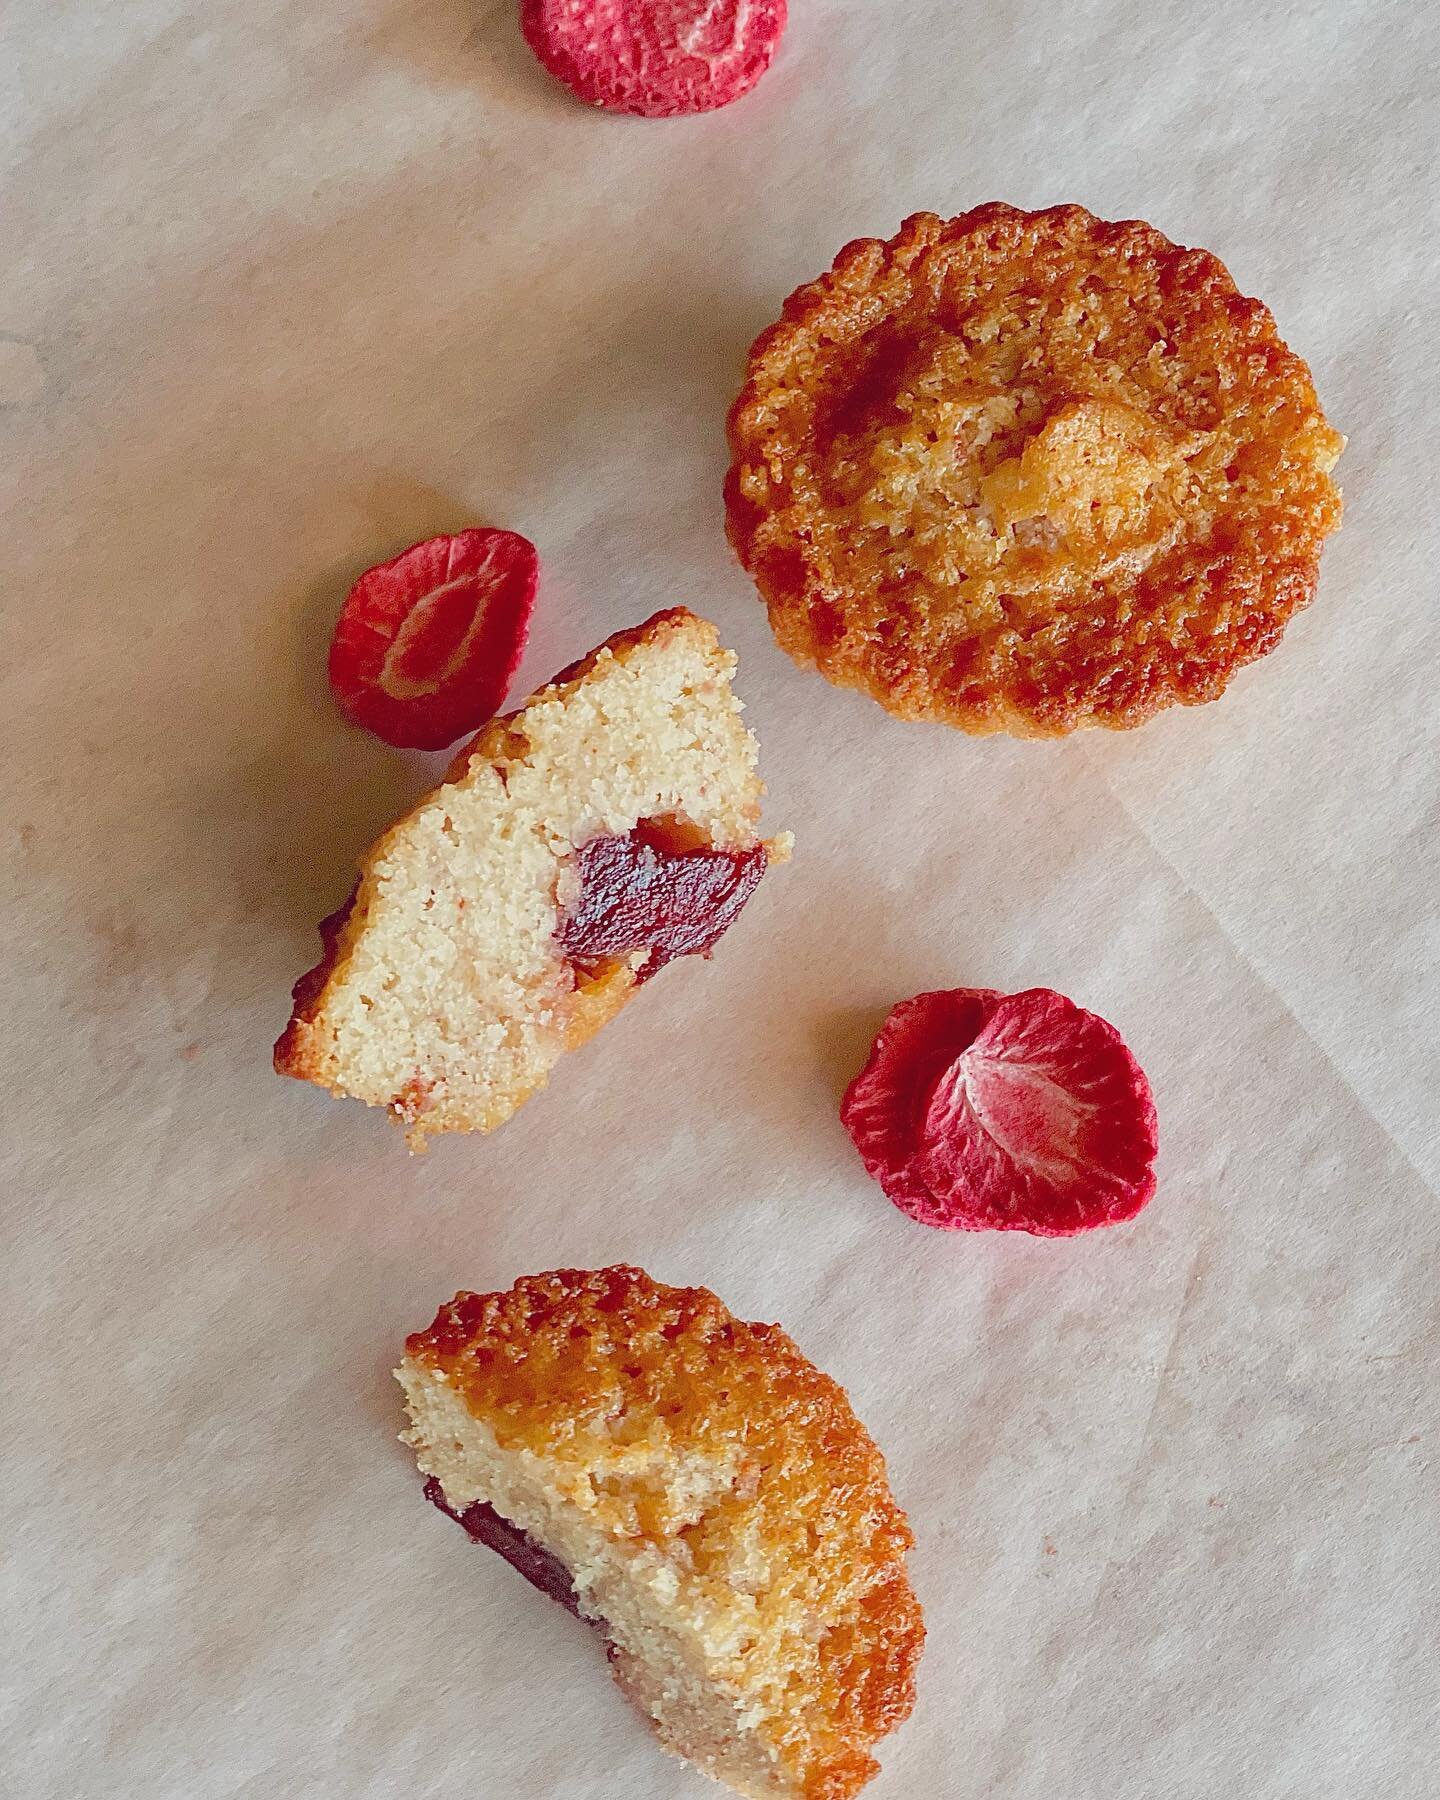 For a limited time (the next few days), our Financiers (browned butter almond cakes) will have preserved Italian strawberries in them. These are quite the treat and won&rsquo;t last long. They remind us of buttered brioche with fresh strawberry jam. 